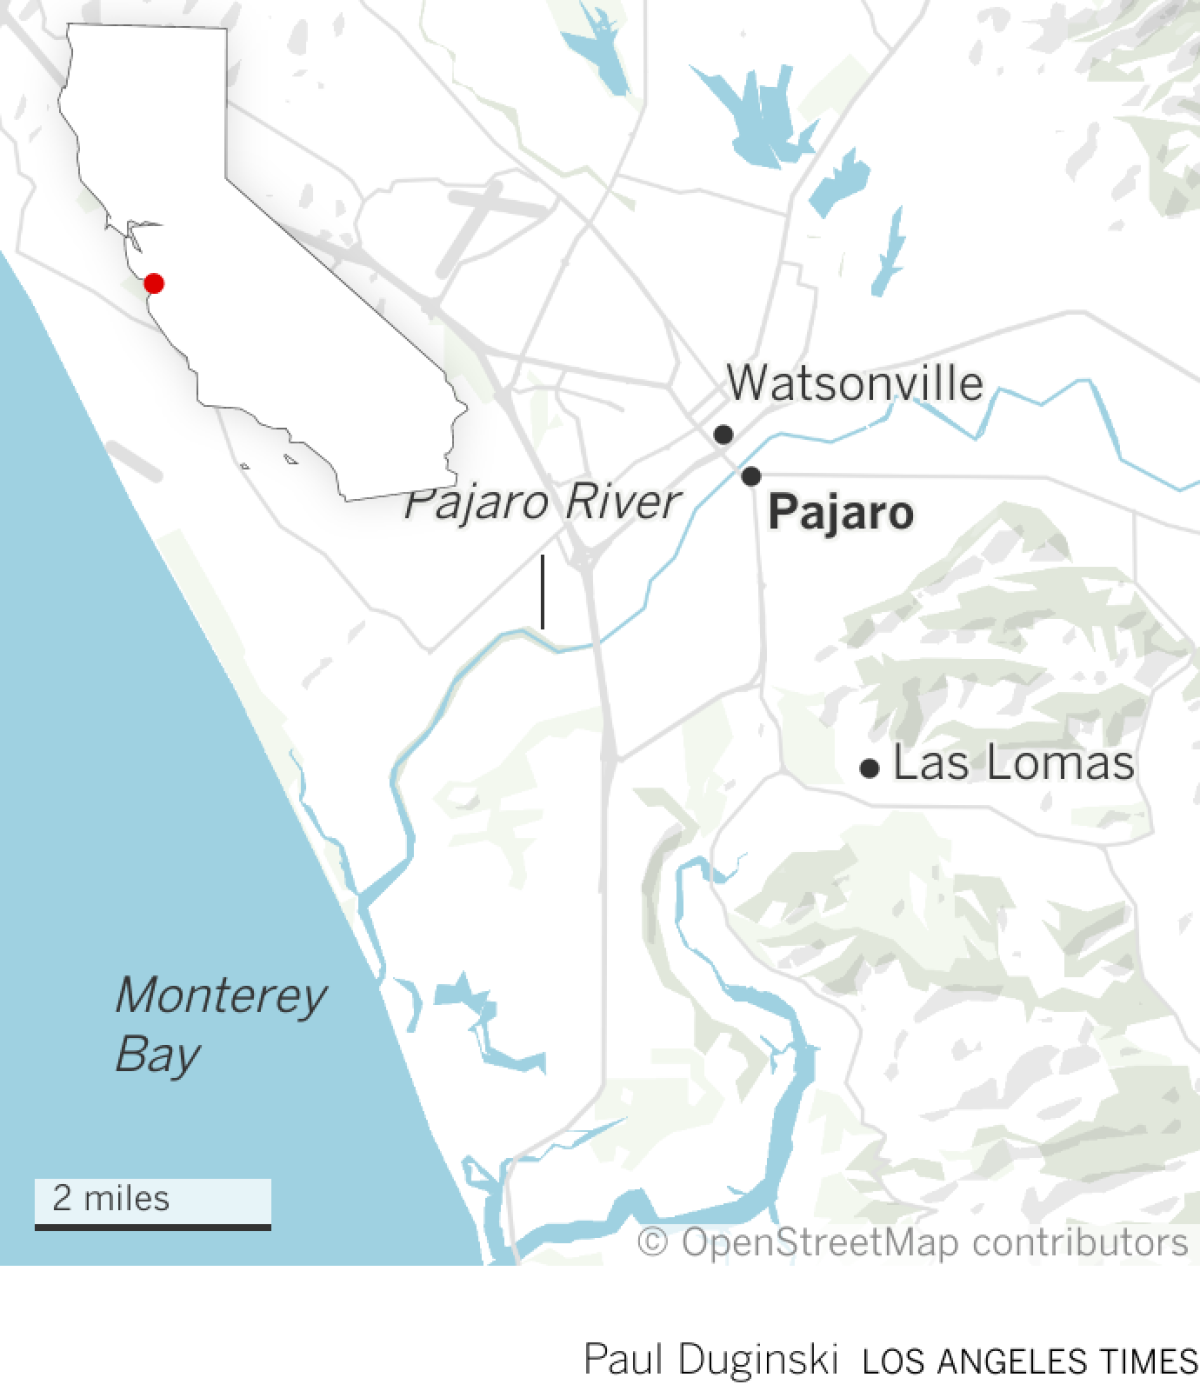 Location map of Pajaro and the nearby town and the Pajaro River.